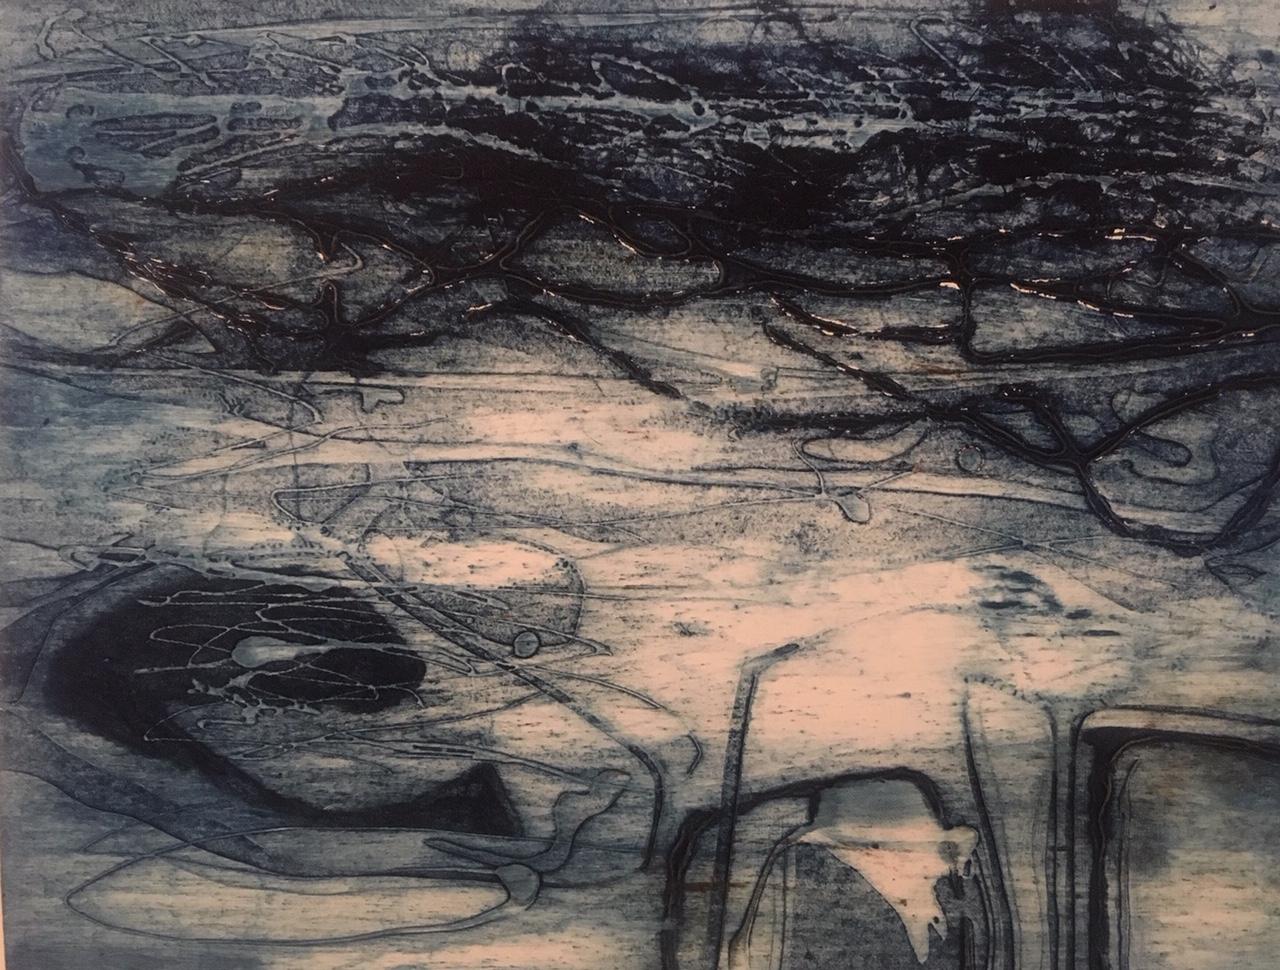 Collagraph print in beige and black swirls